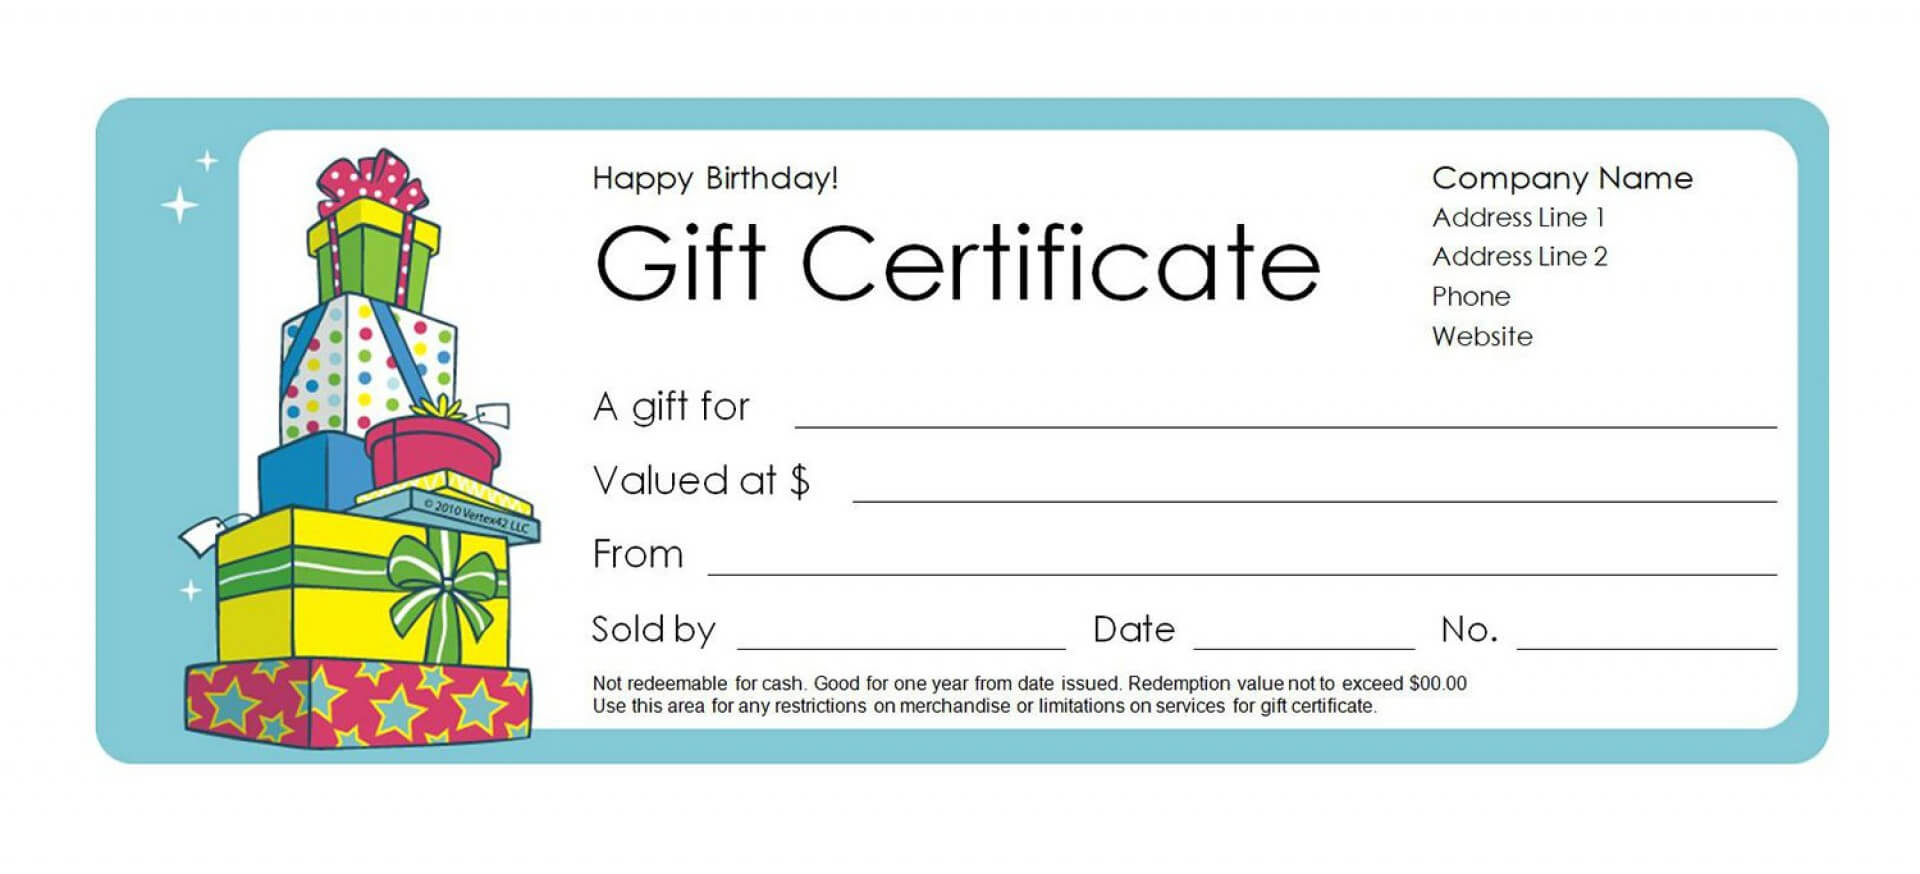 044 Gift Certificate Word Template Elegant Microsoft Throughout Certificate Template For Pages